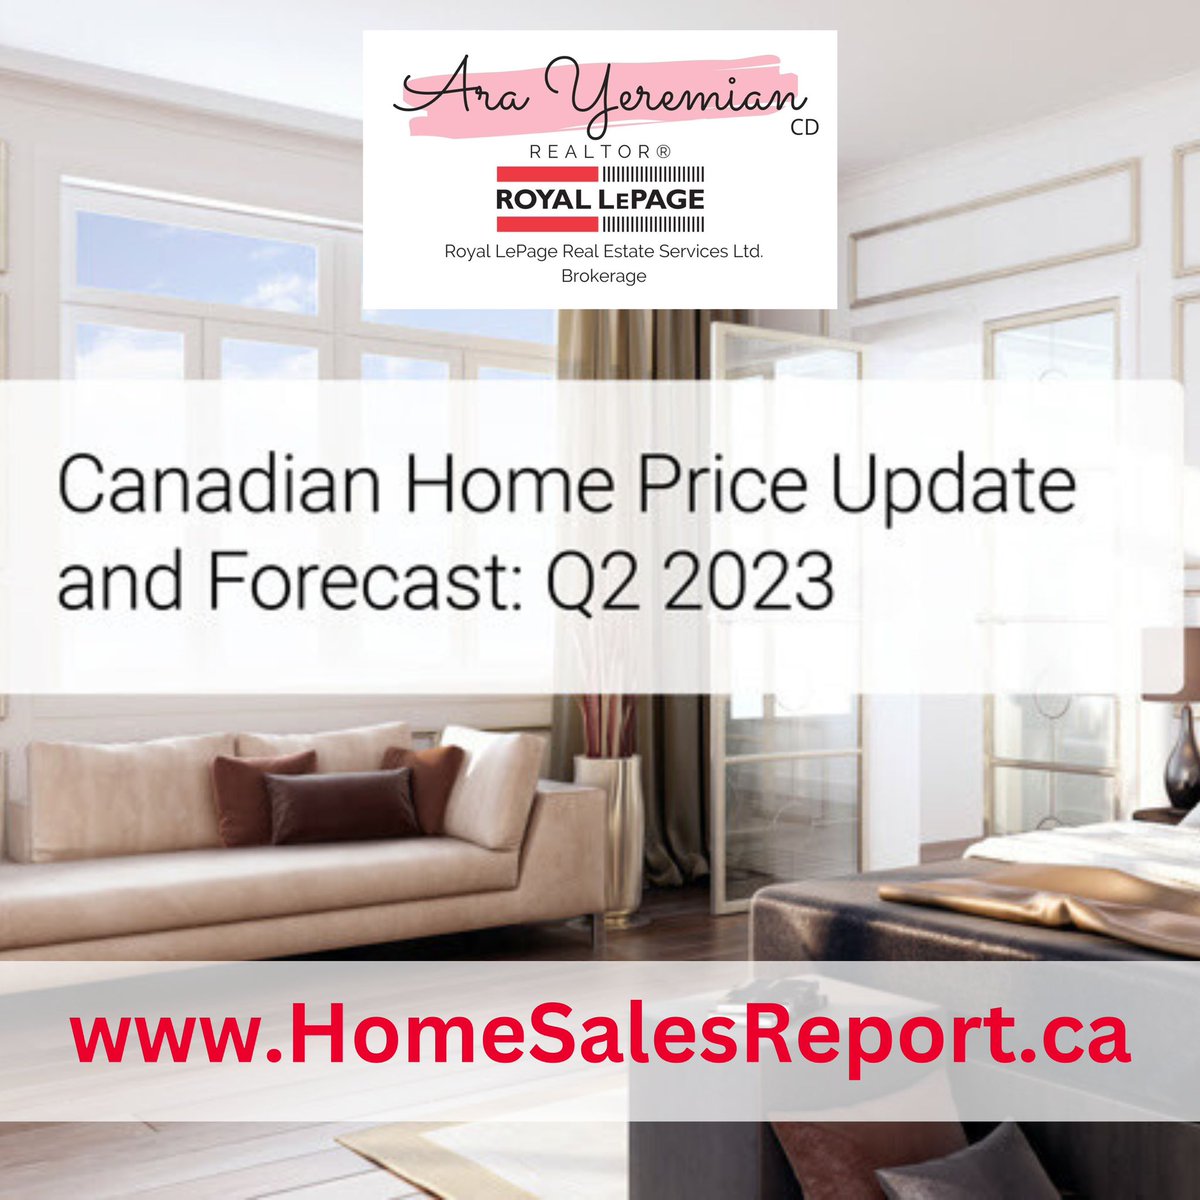 The Royal LePage Q2 2023 Home Price Update and Market Forecast was released last week. It is a detailed report of the current market trends and predictions for the whole country.
You can read the report at HomeSalesReport.ca
#RealEstate #RealEstateReport #Realtor